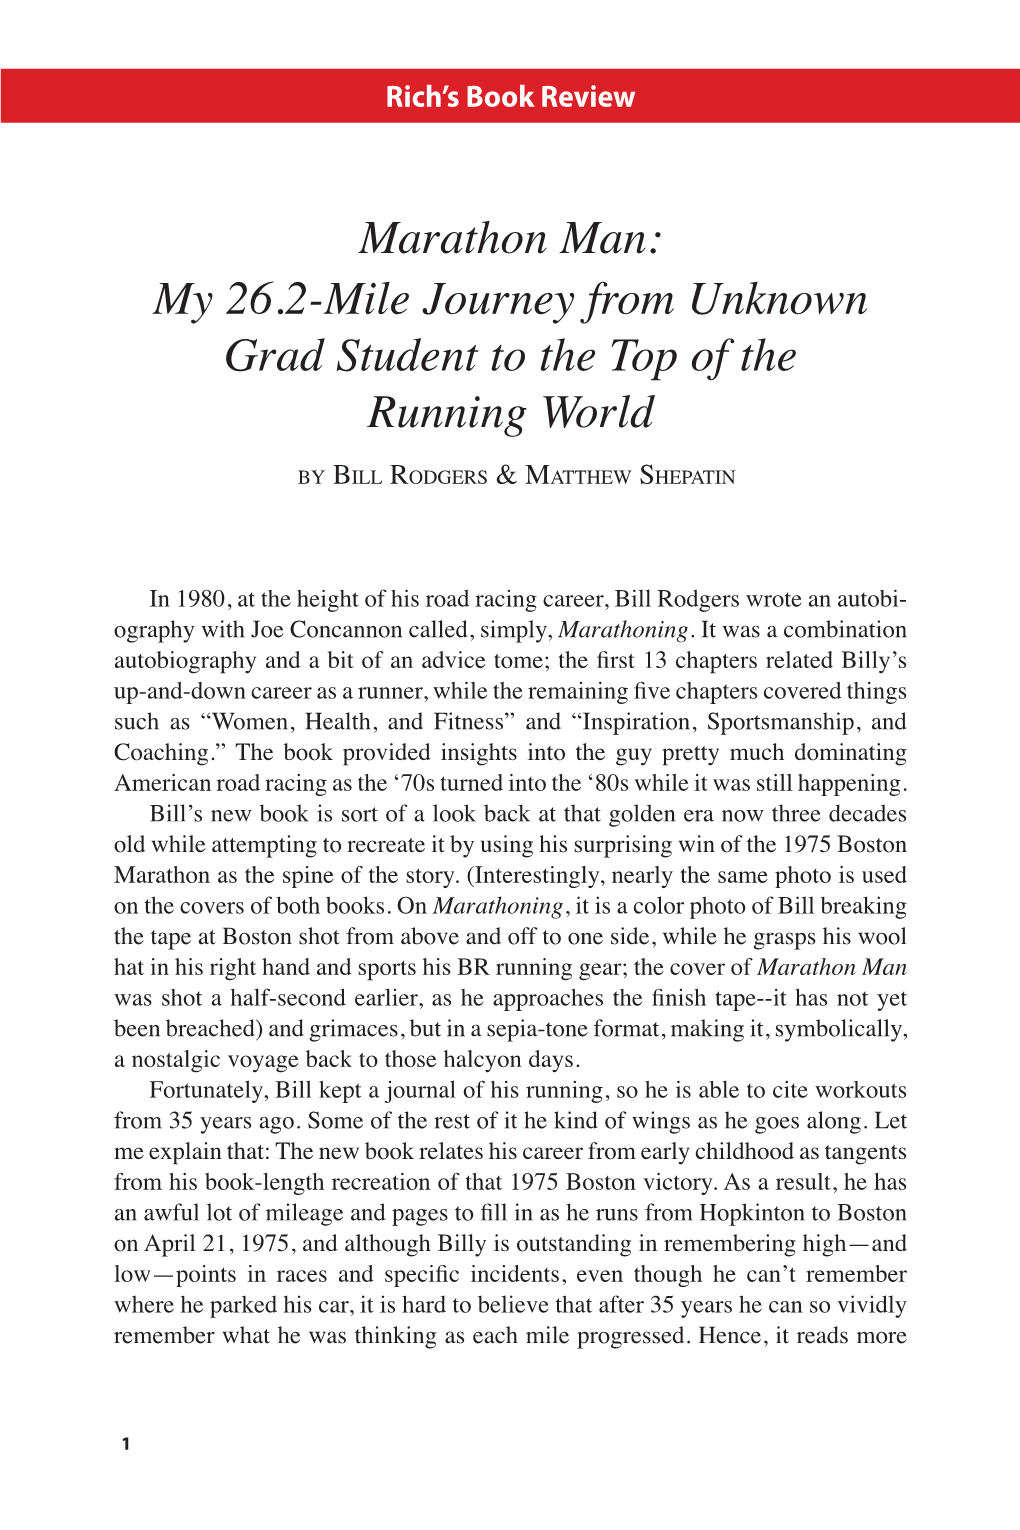 My 26.2-Mile Journey from Unknown Grad Student to the Top of the Running World by Bill Rodgers & Matthew Shepatin